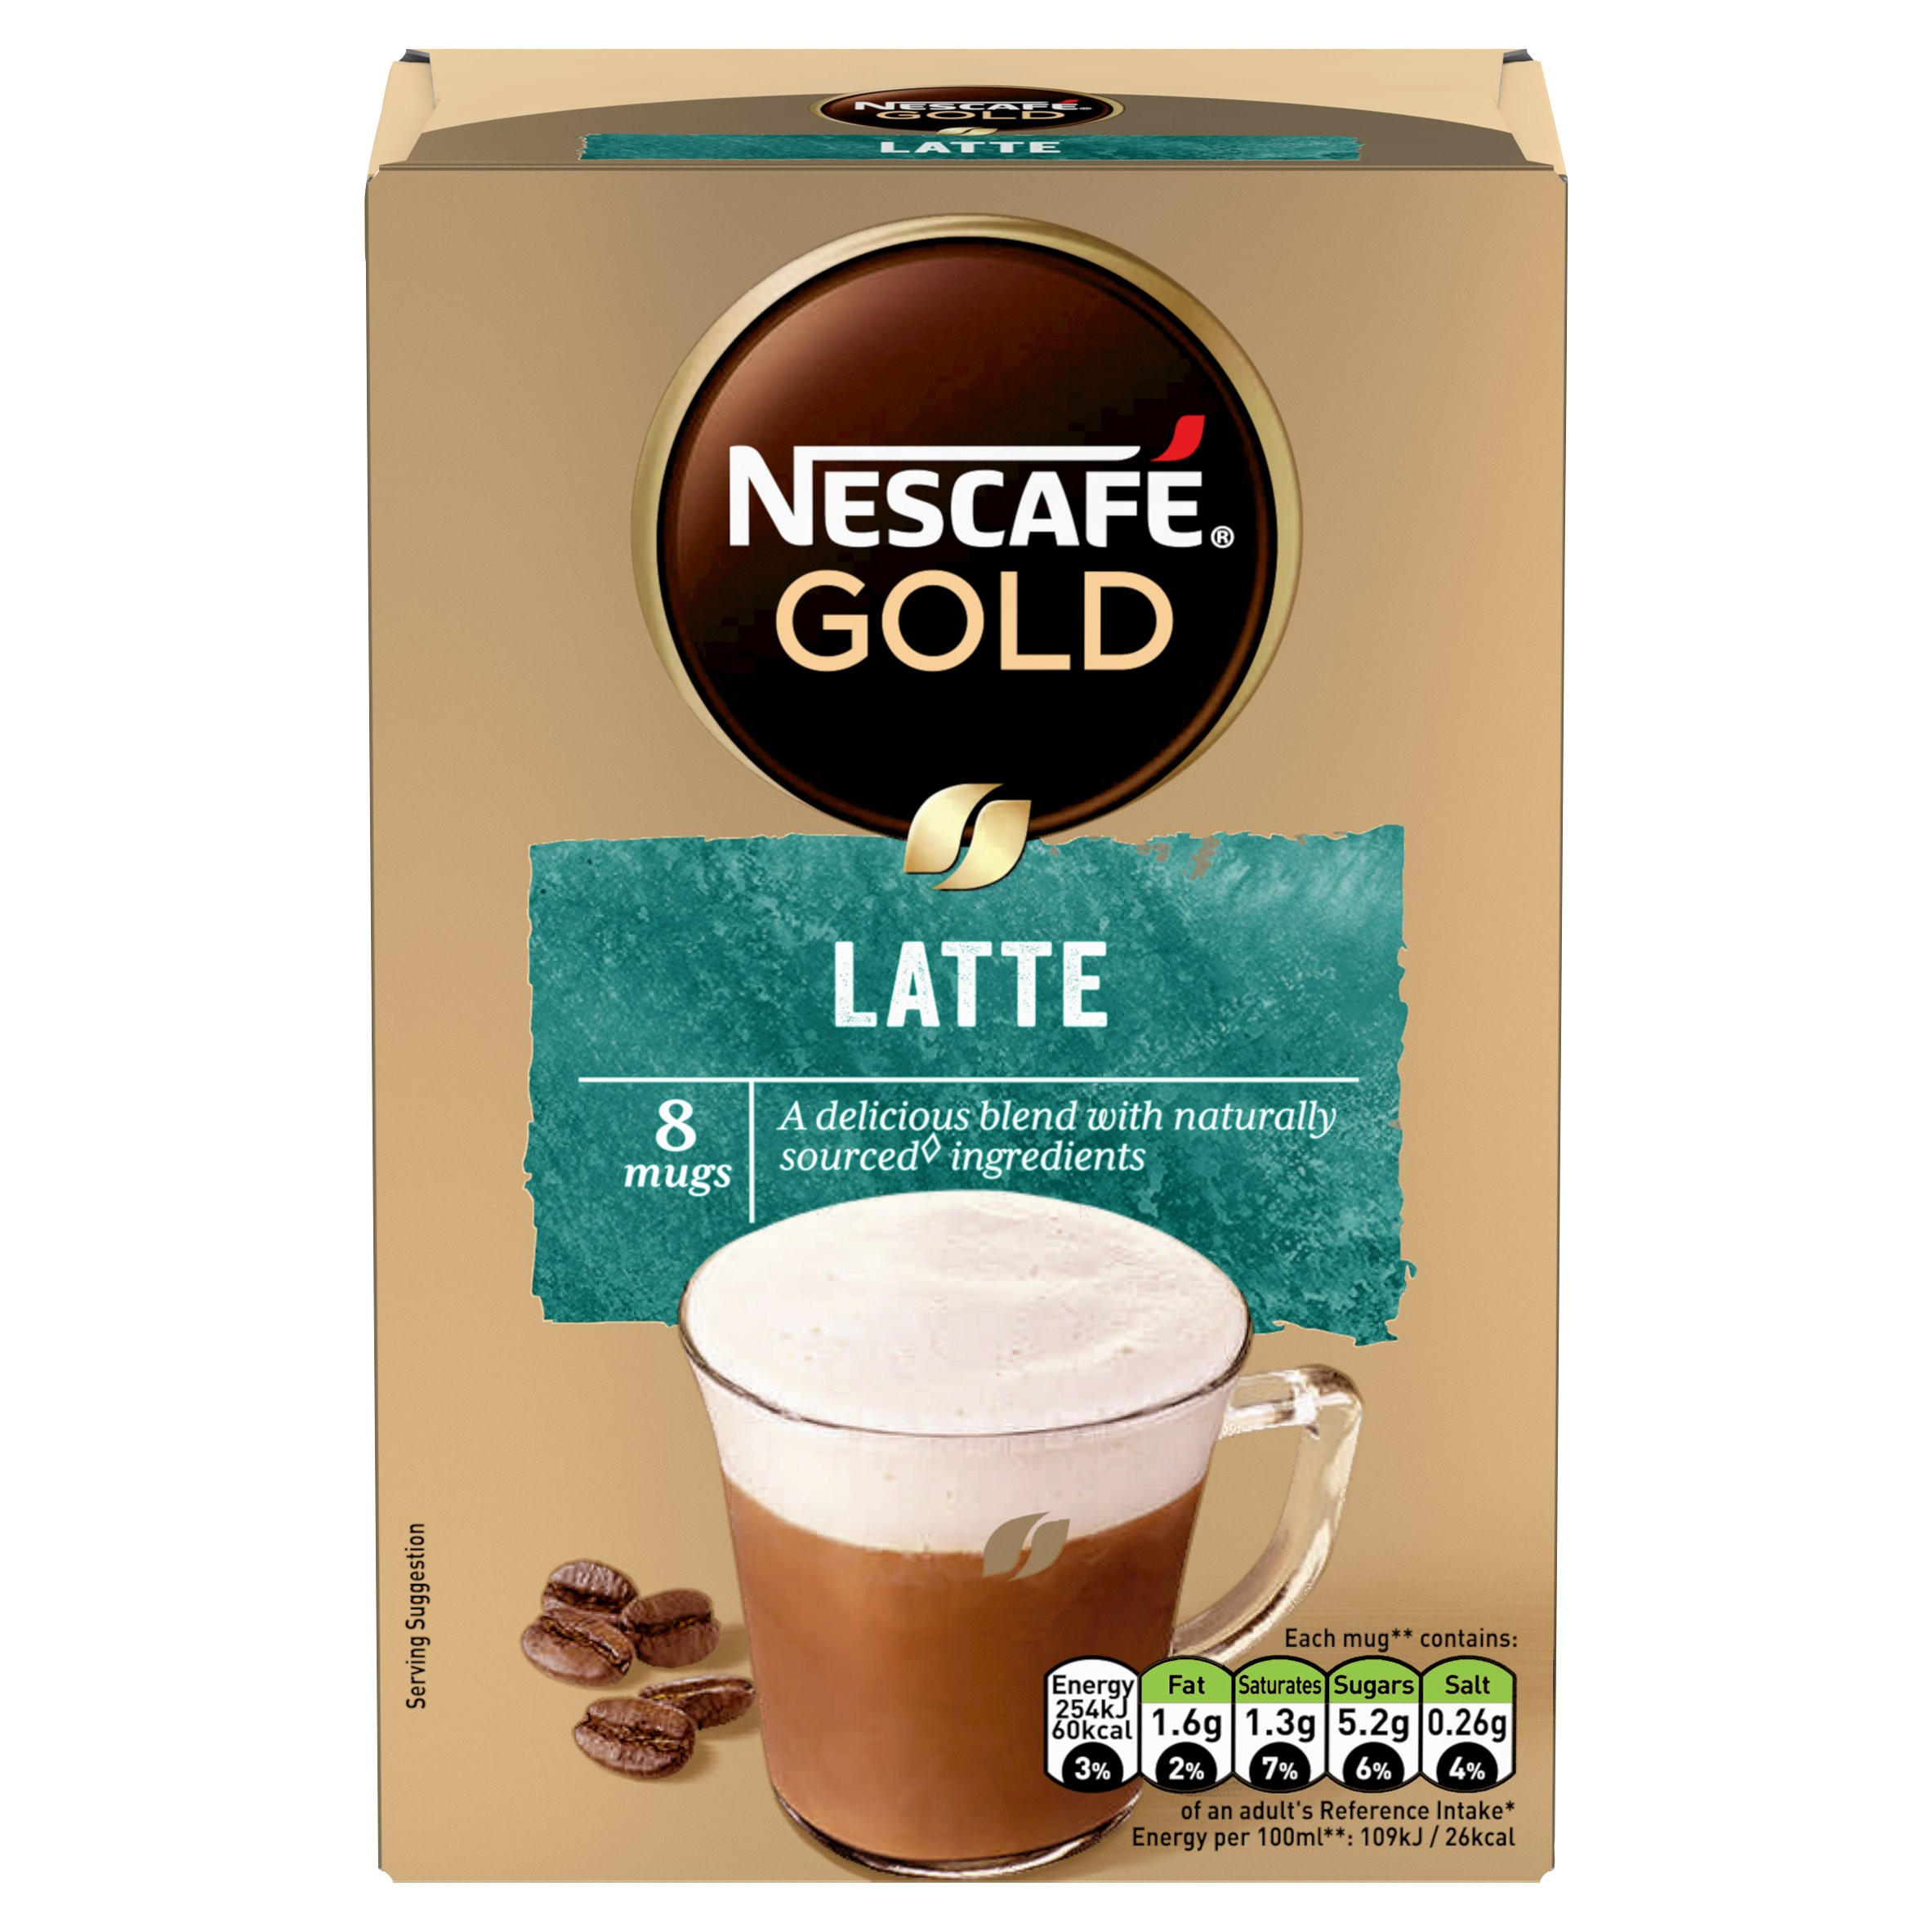 2 Packs Nescafe 3 in 1 MOCHA Coffee Latte - Instant Coffee Packets - Single  Serve Flavored Coffee Mix (15 Sticks/Pack - Total 30 Sticks) 